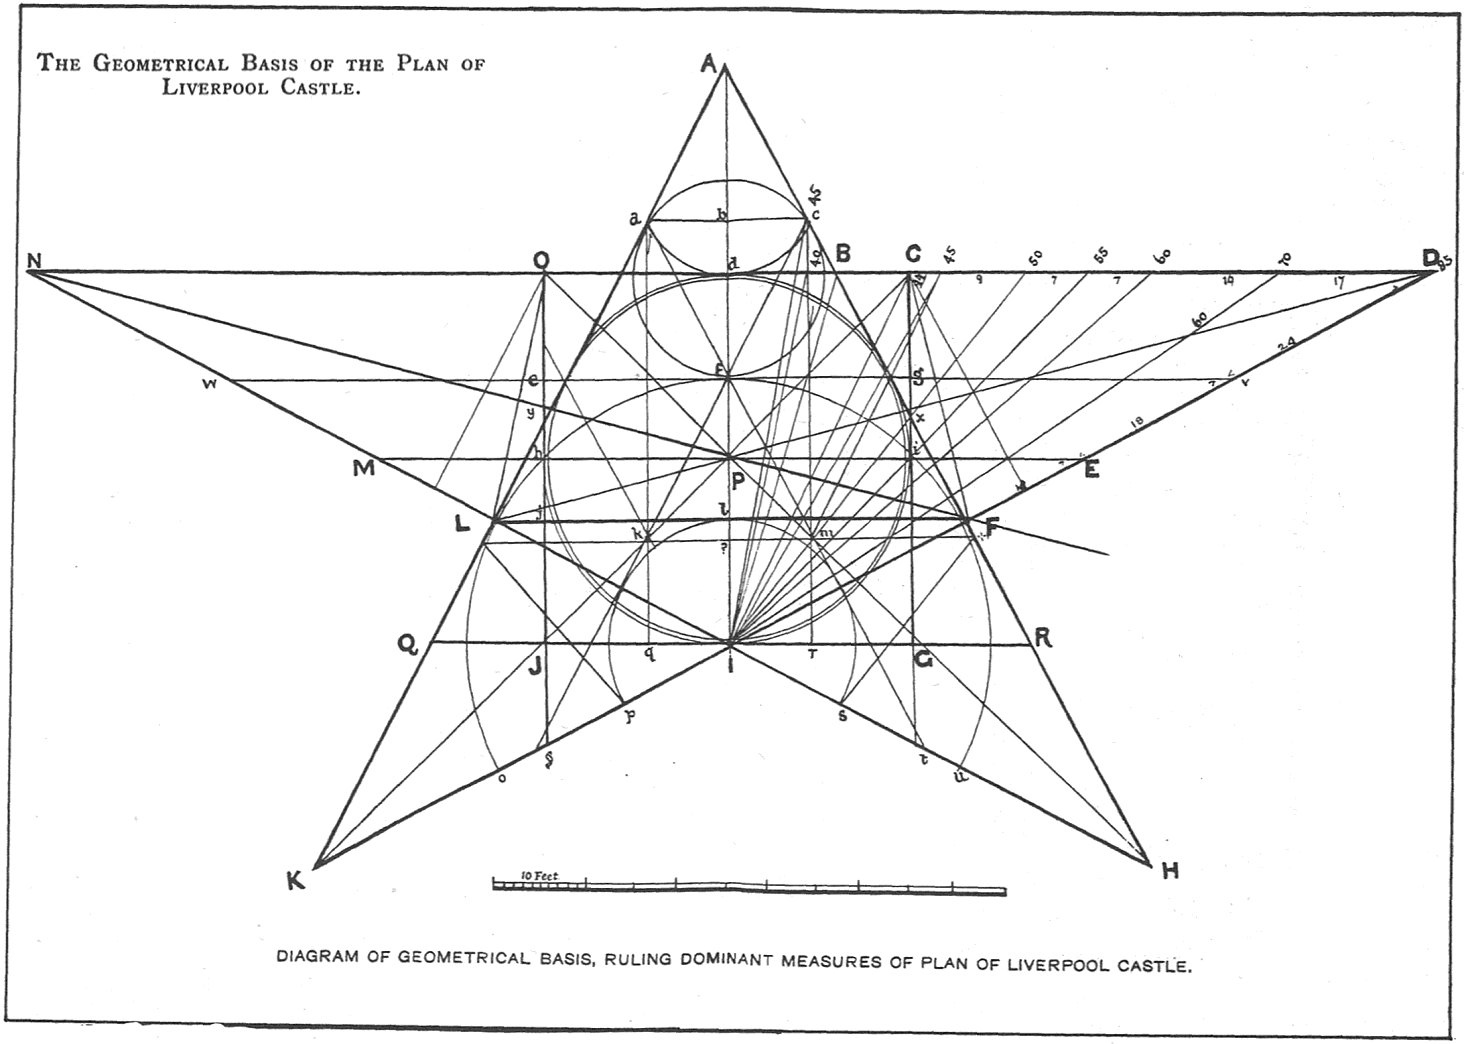 Diagram of pentacle geometry at Liverpool Castle